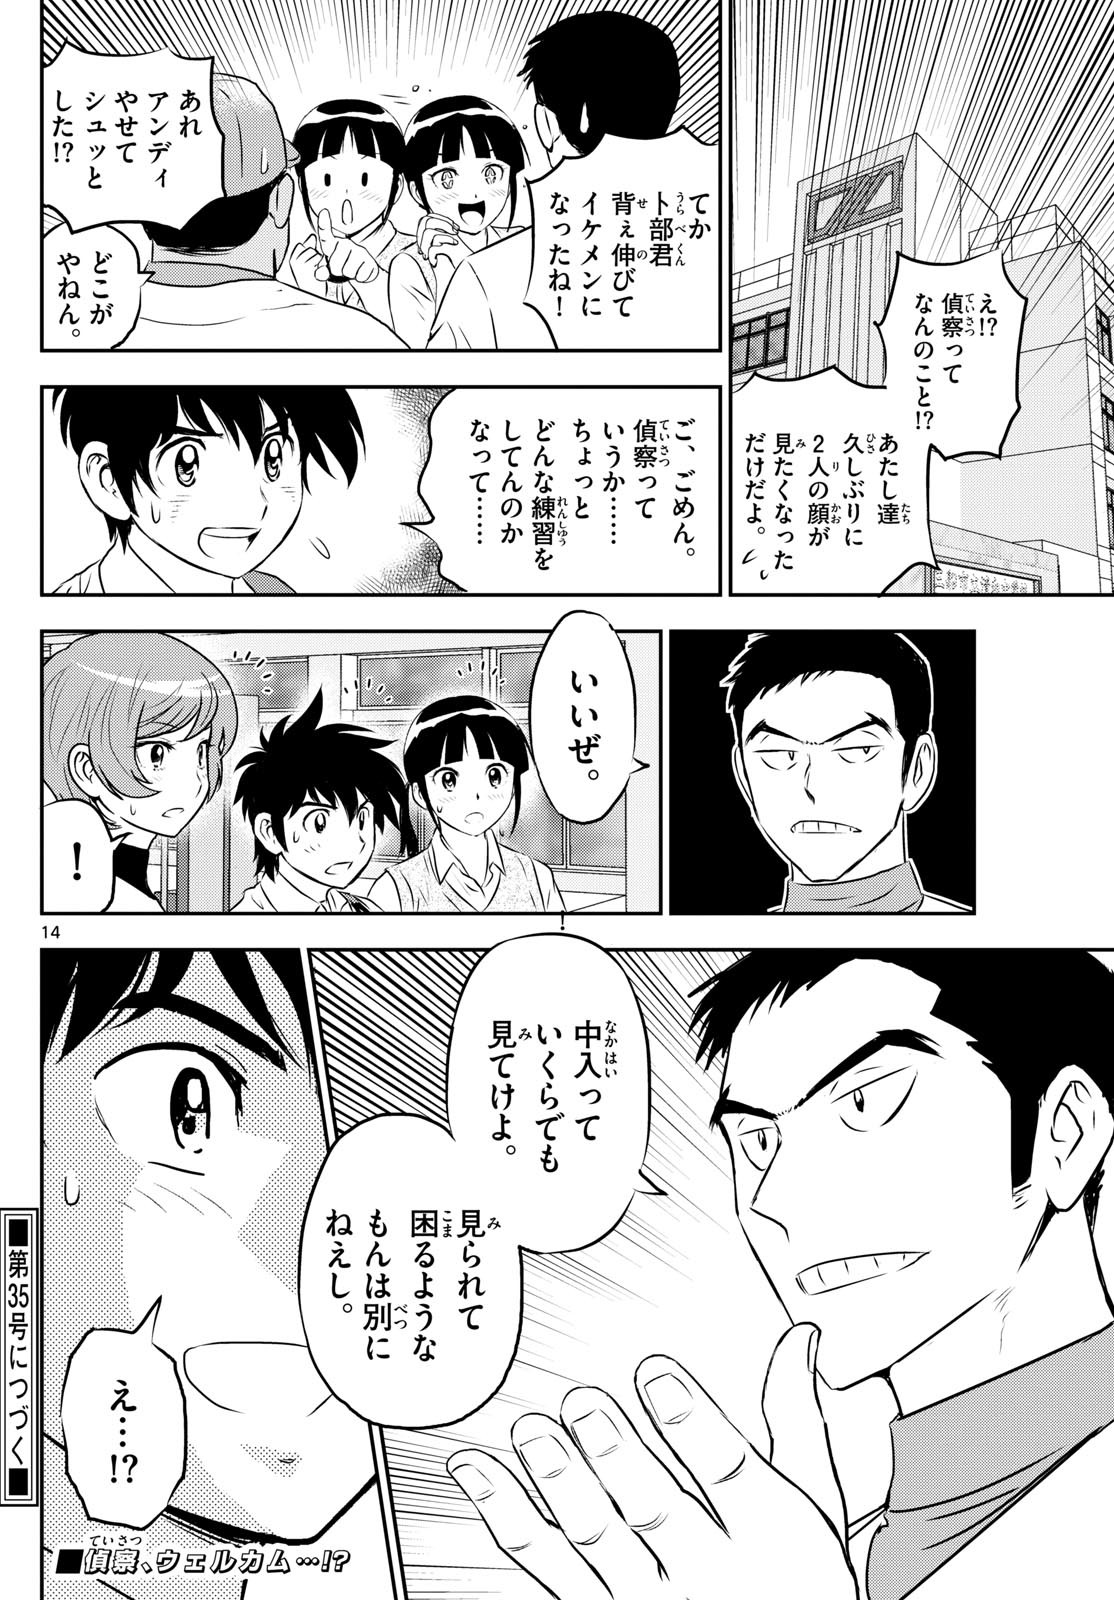 Major 2nd - メジャーセカンド - Chapter 259 - Page 14